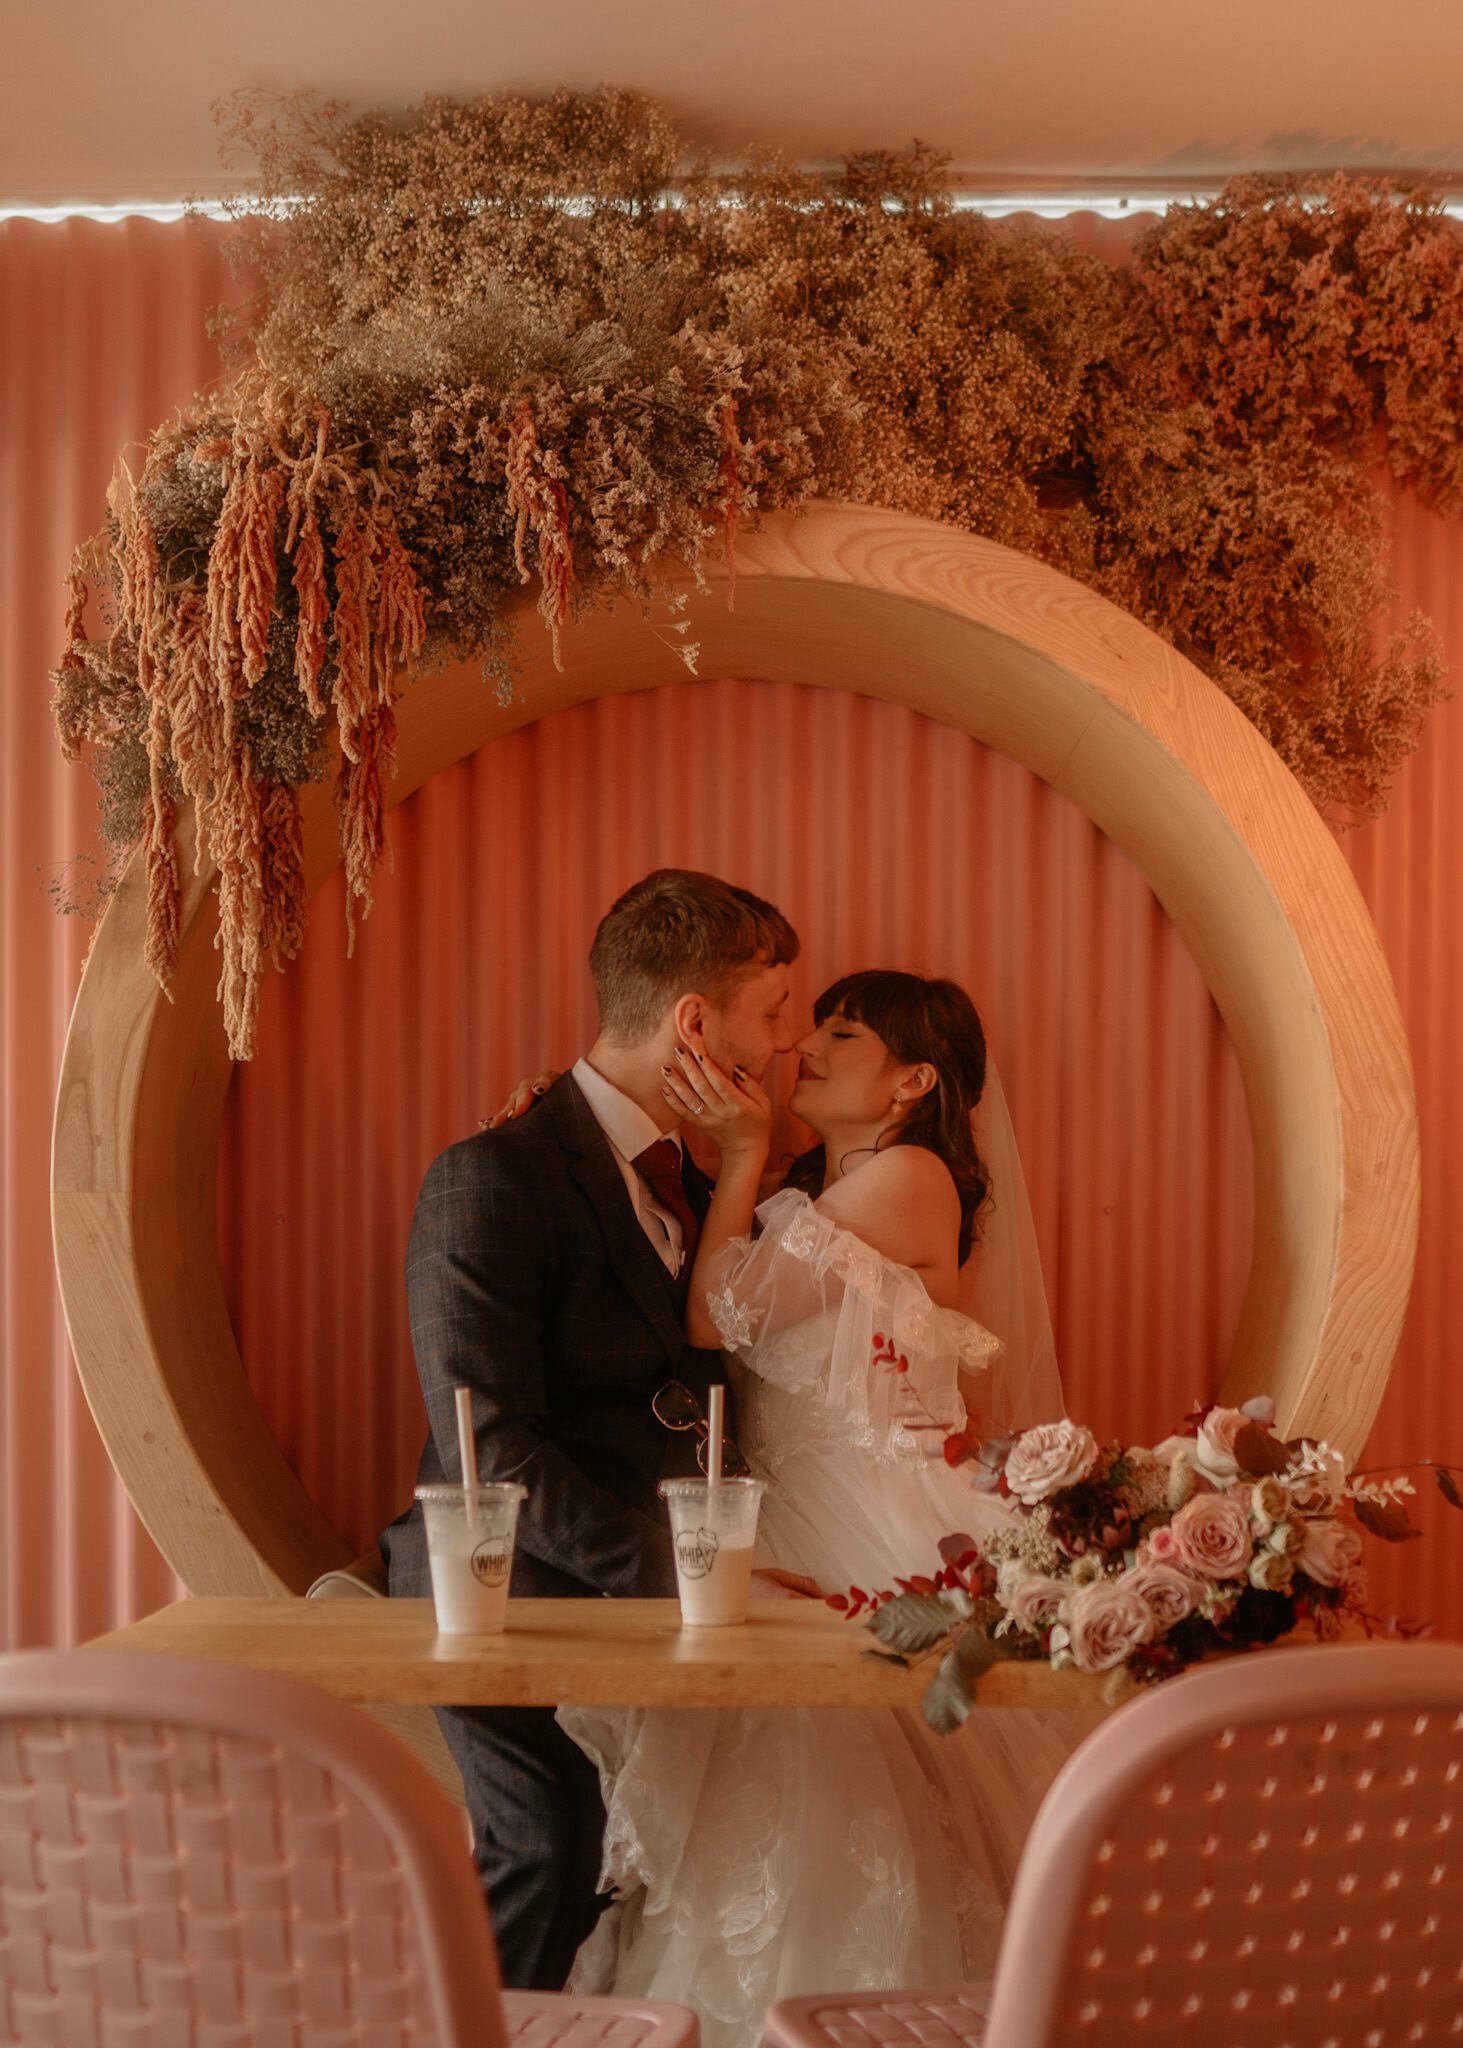  A bride and groom kissing inside a circular wooden cove with a peach wall behind them. There are 2 milkshakes and a bouquet of flowers in front of them 